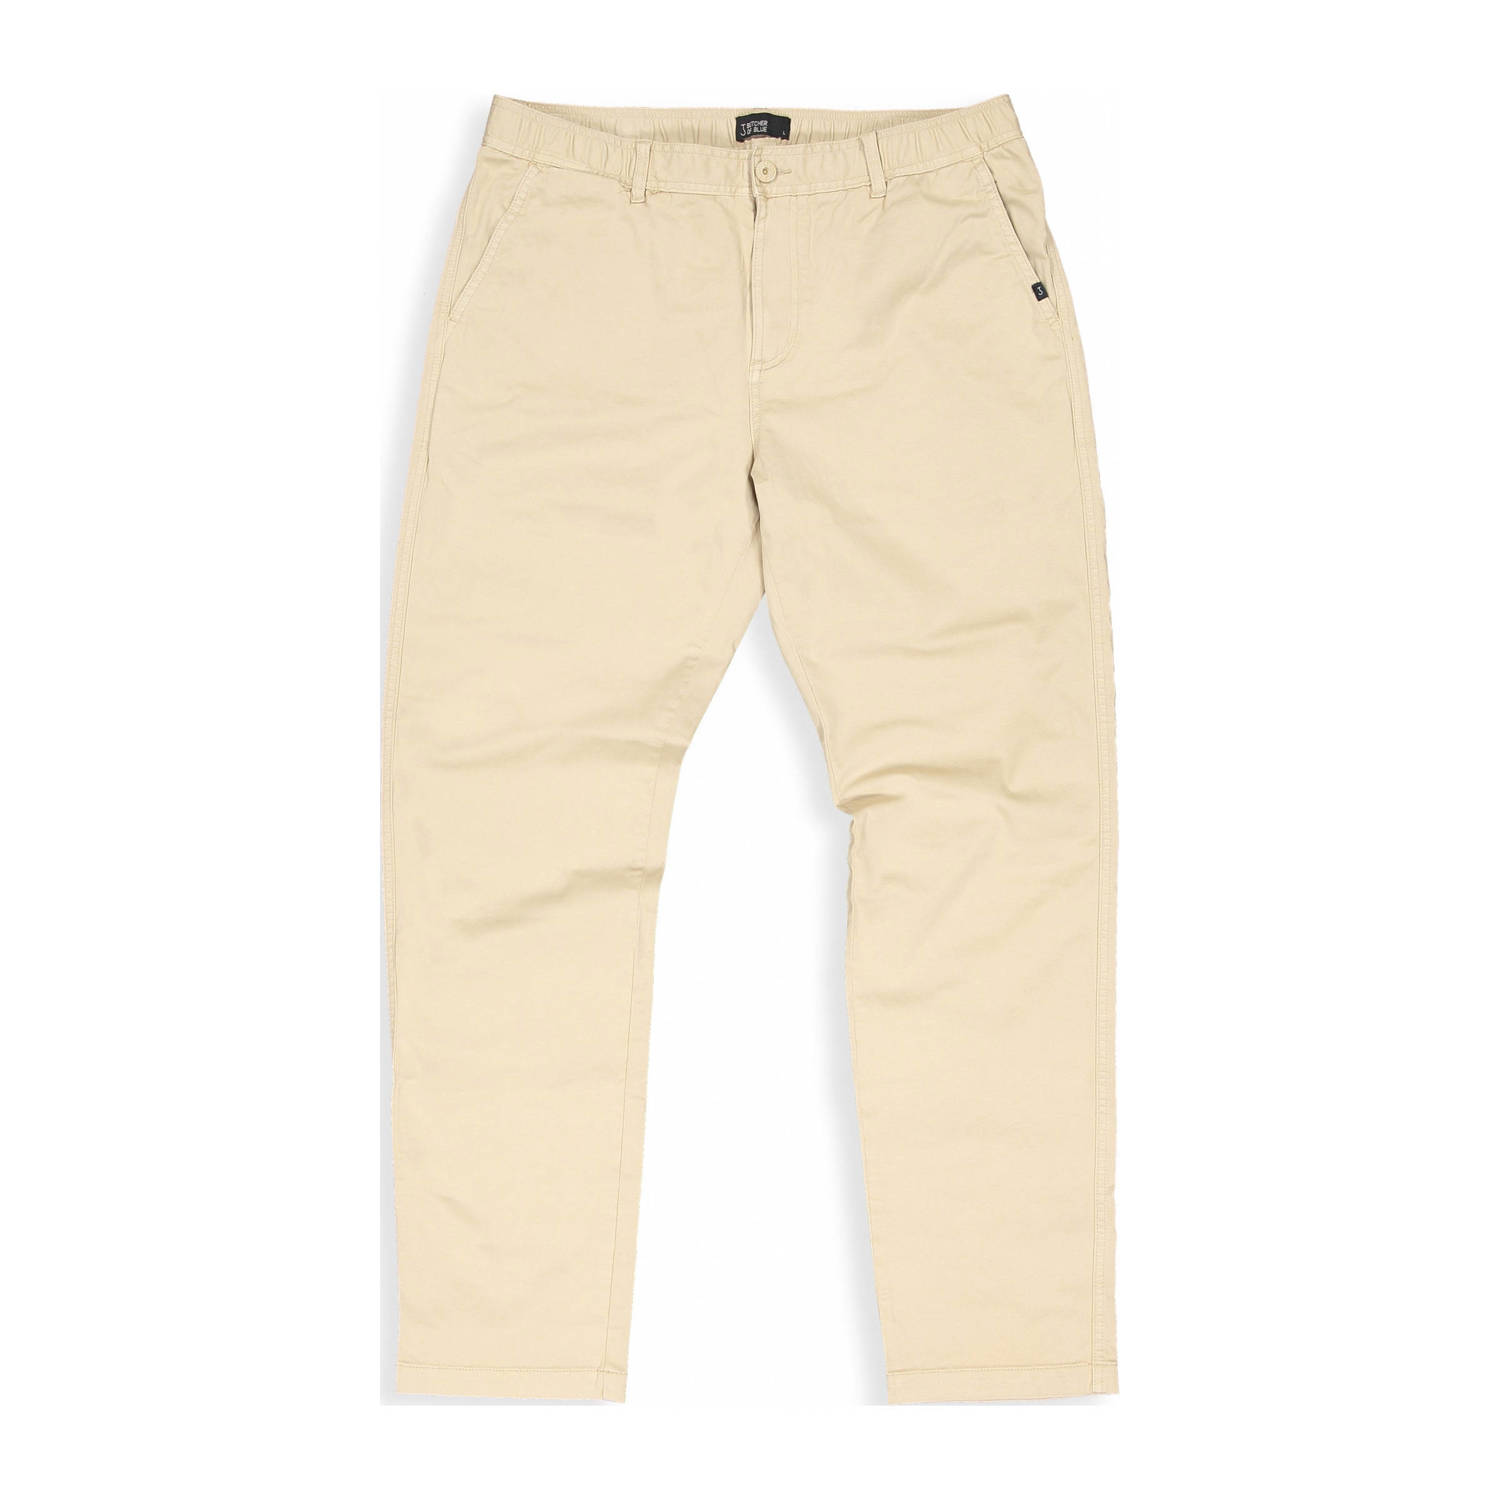 Butcher of Blue slim fit chino Marvin sahara beige